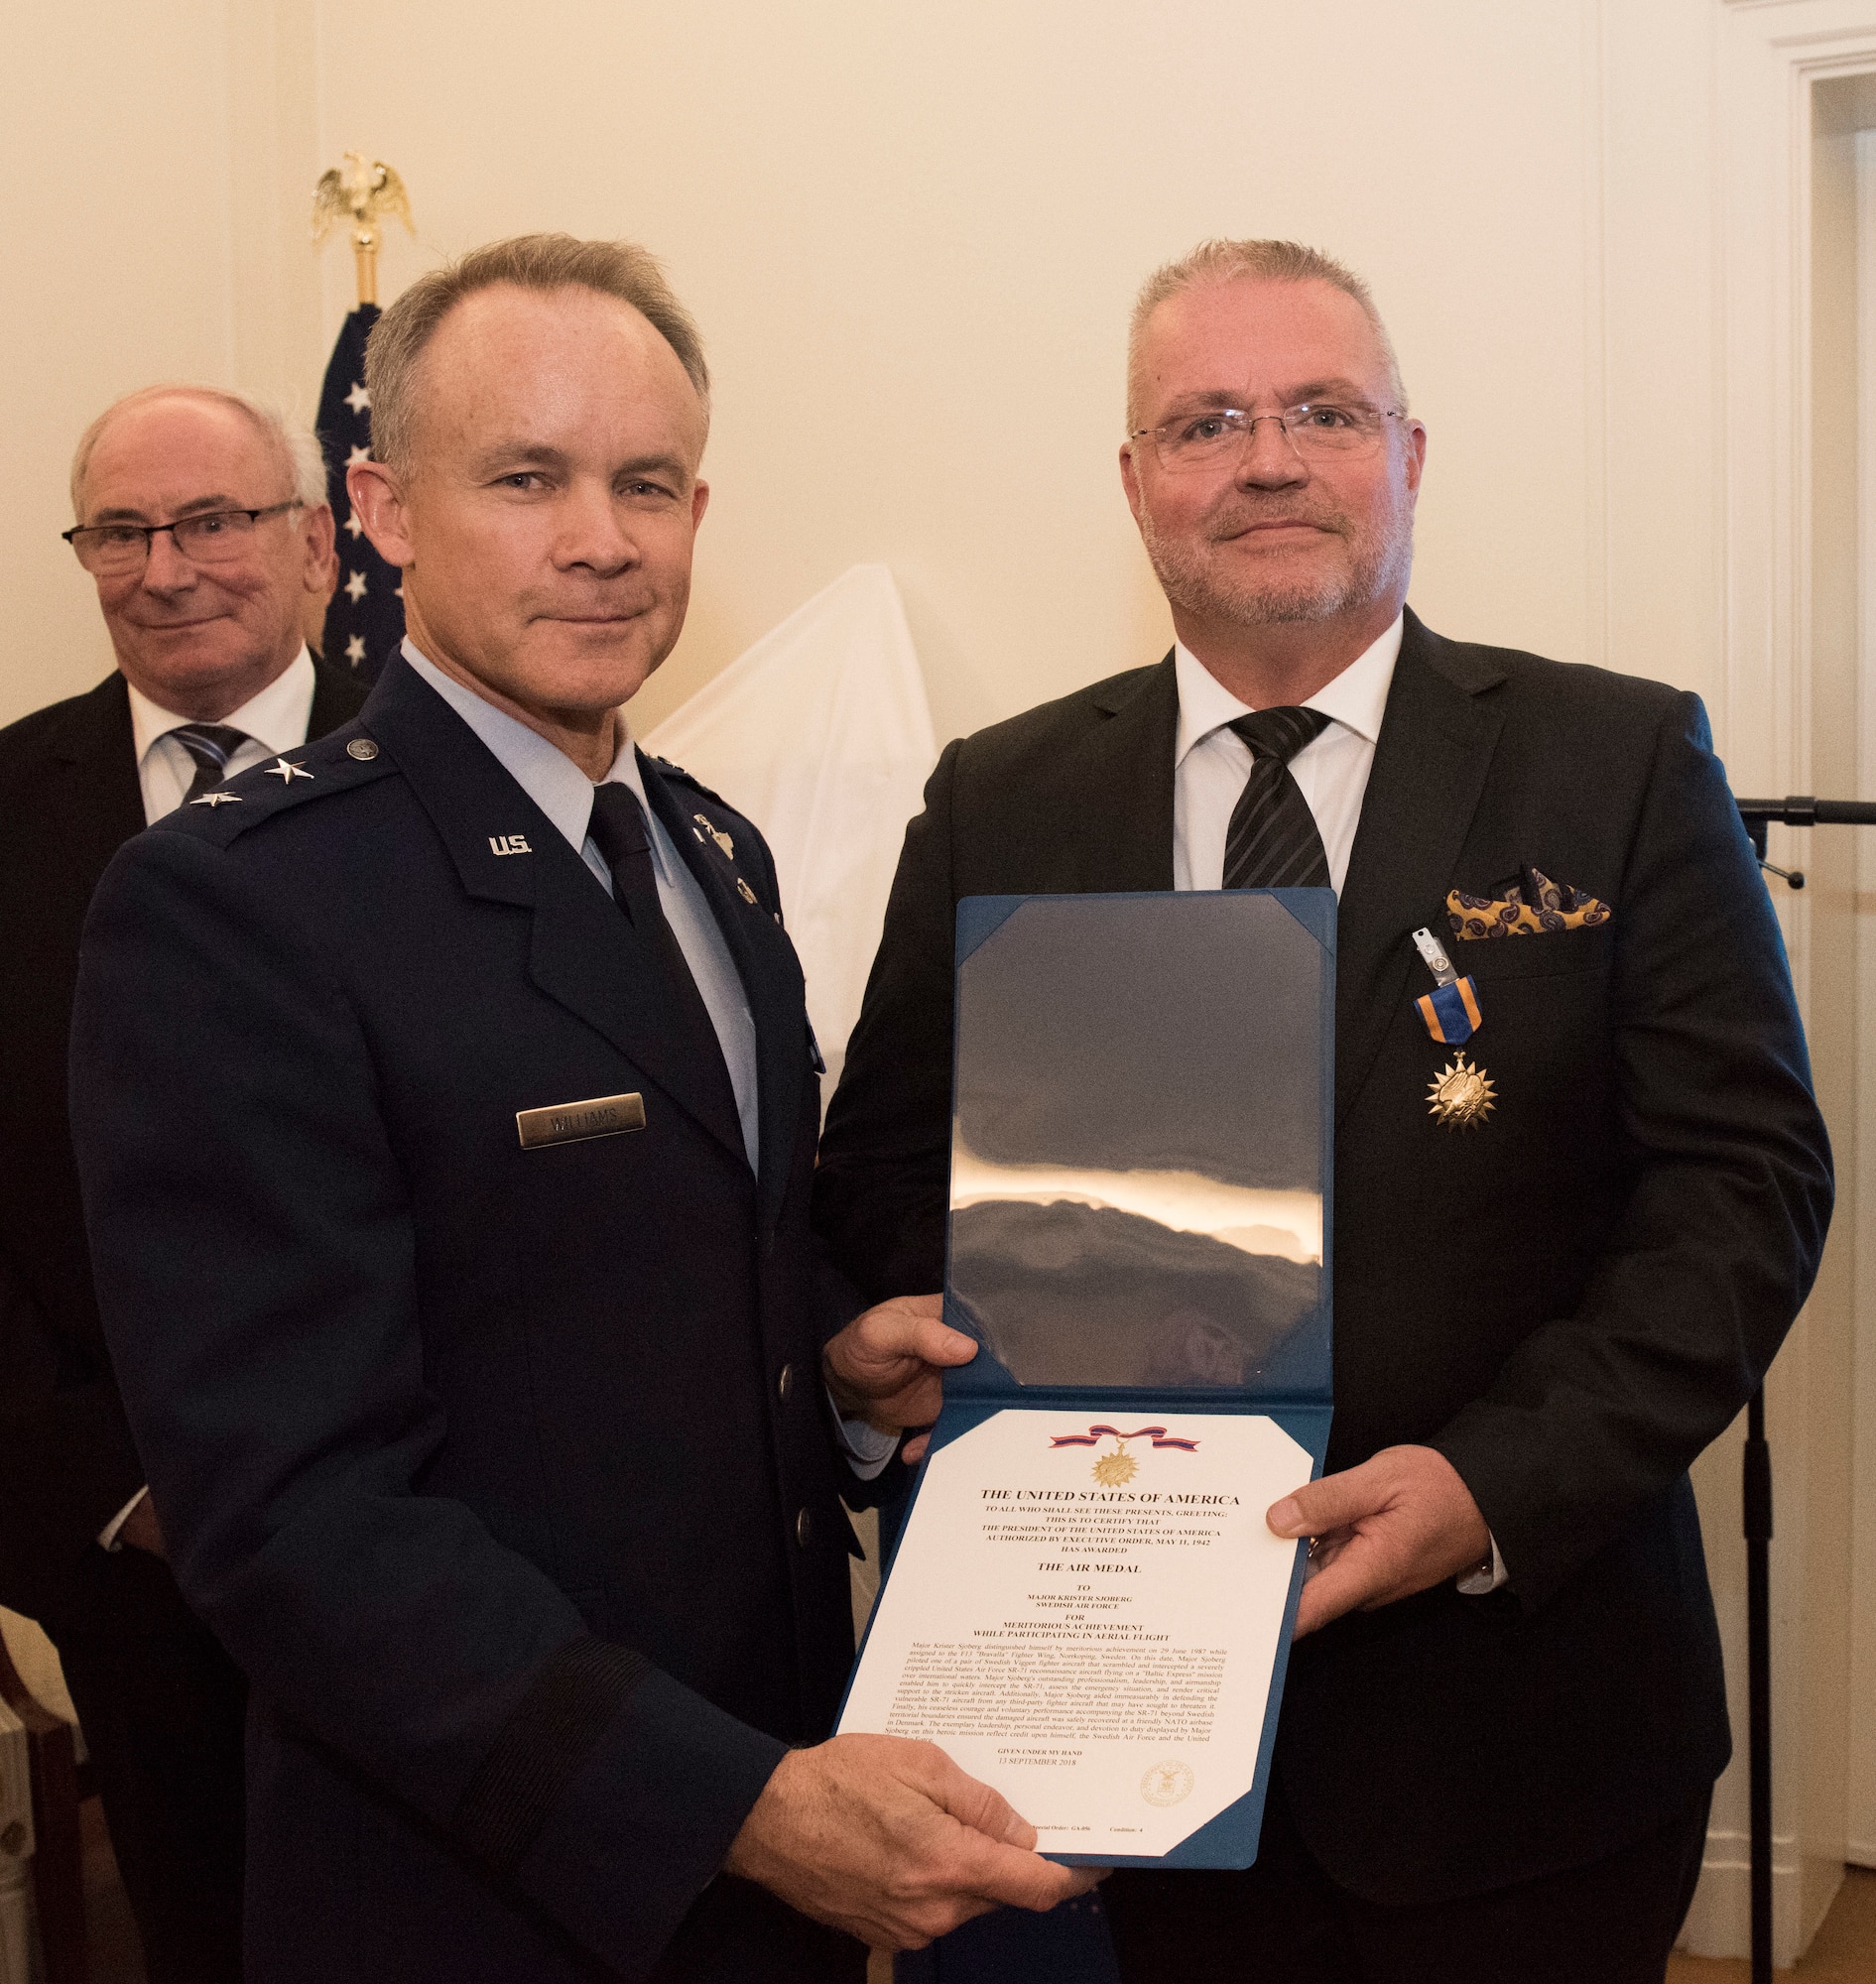 U.S. Air Force Maj. Gen. John Williams, Mobilization Assistant to the commander, U.S. Air Forces in Europe and Africa, presents the U.S. Air Medal to Swedish air force Maj. Roger Moller in Stockholm, Sweden, Nov. 28, 2018. The Swedish pilots were awarded the U.S. Air Medal for their actions on June 29, 1987. (U.S. Air Force Photo by Senior Airman Kelly O'Connor)